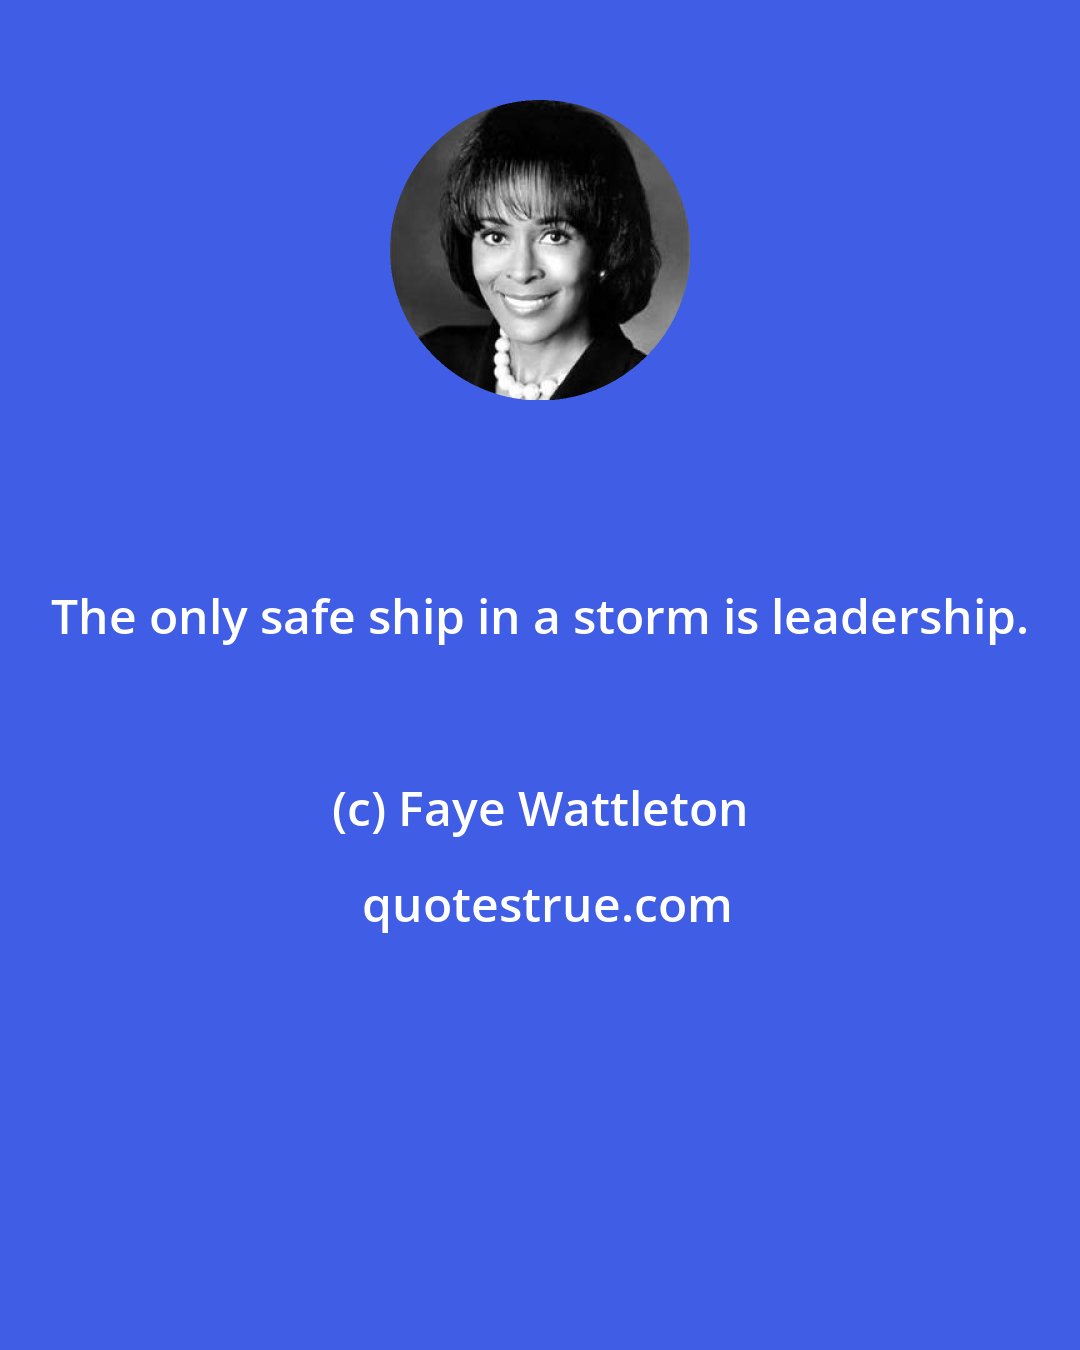 Faye Wattleton: The only safe ship in a storm is leadership.